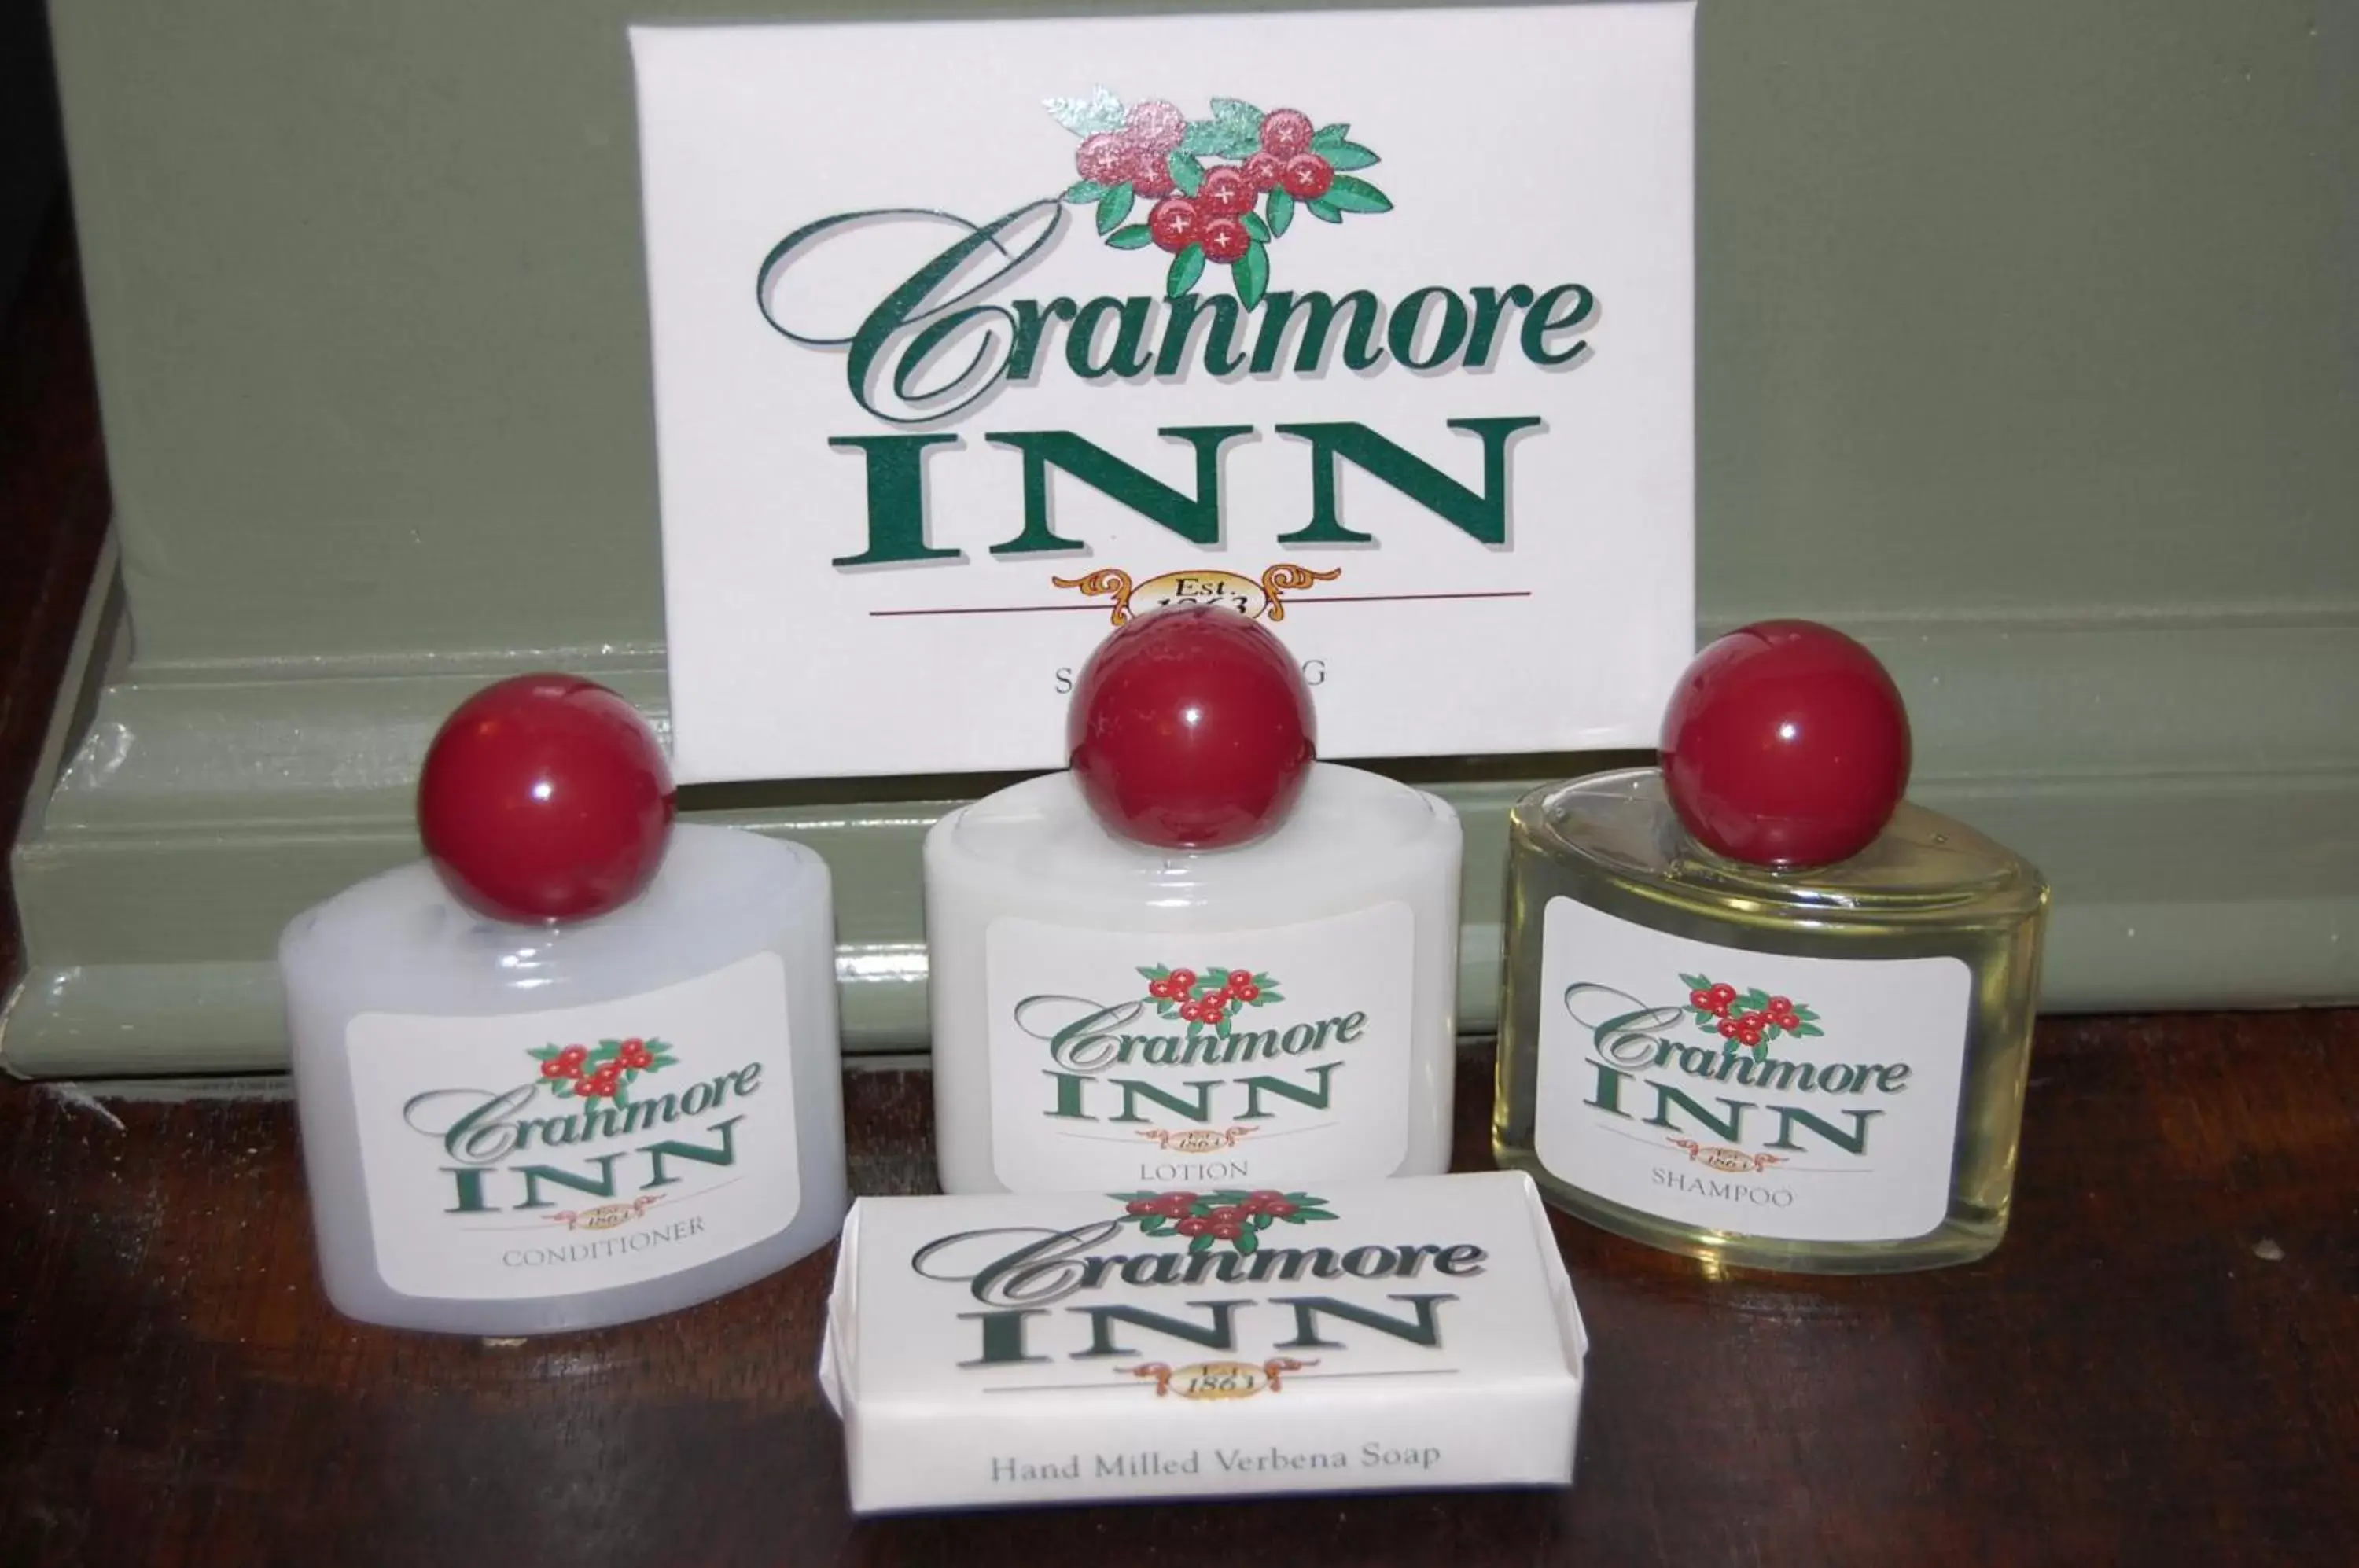 Other in Cranmore Inn and Suites, a North Conway boutique hotel